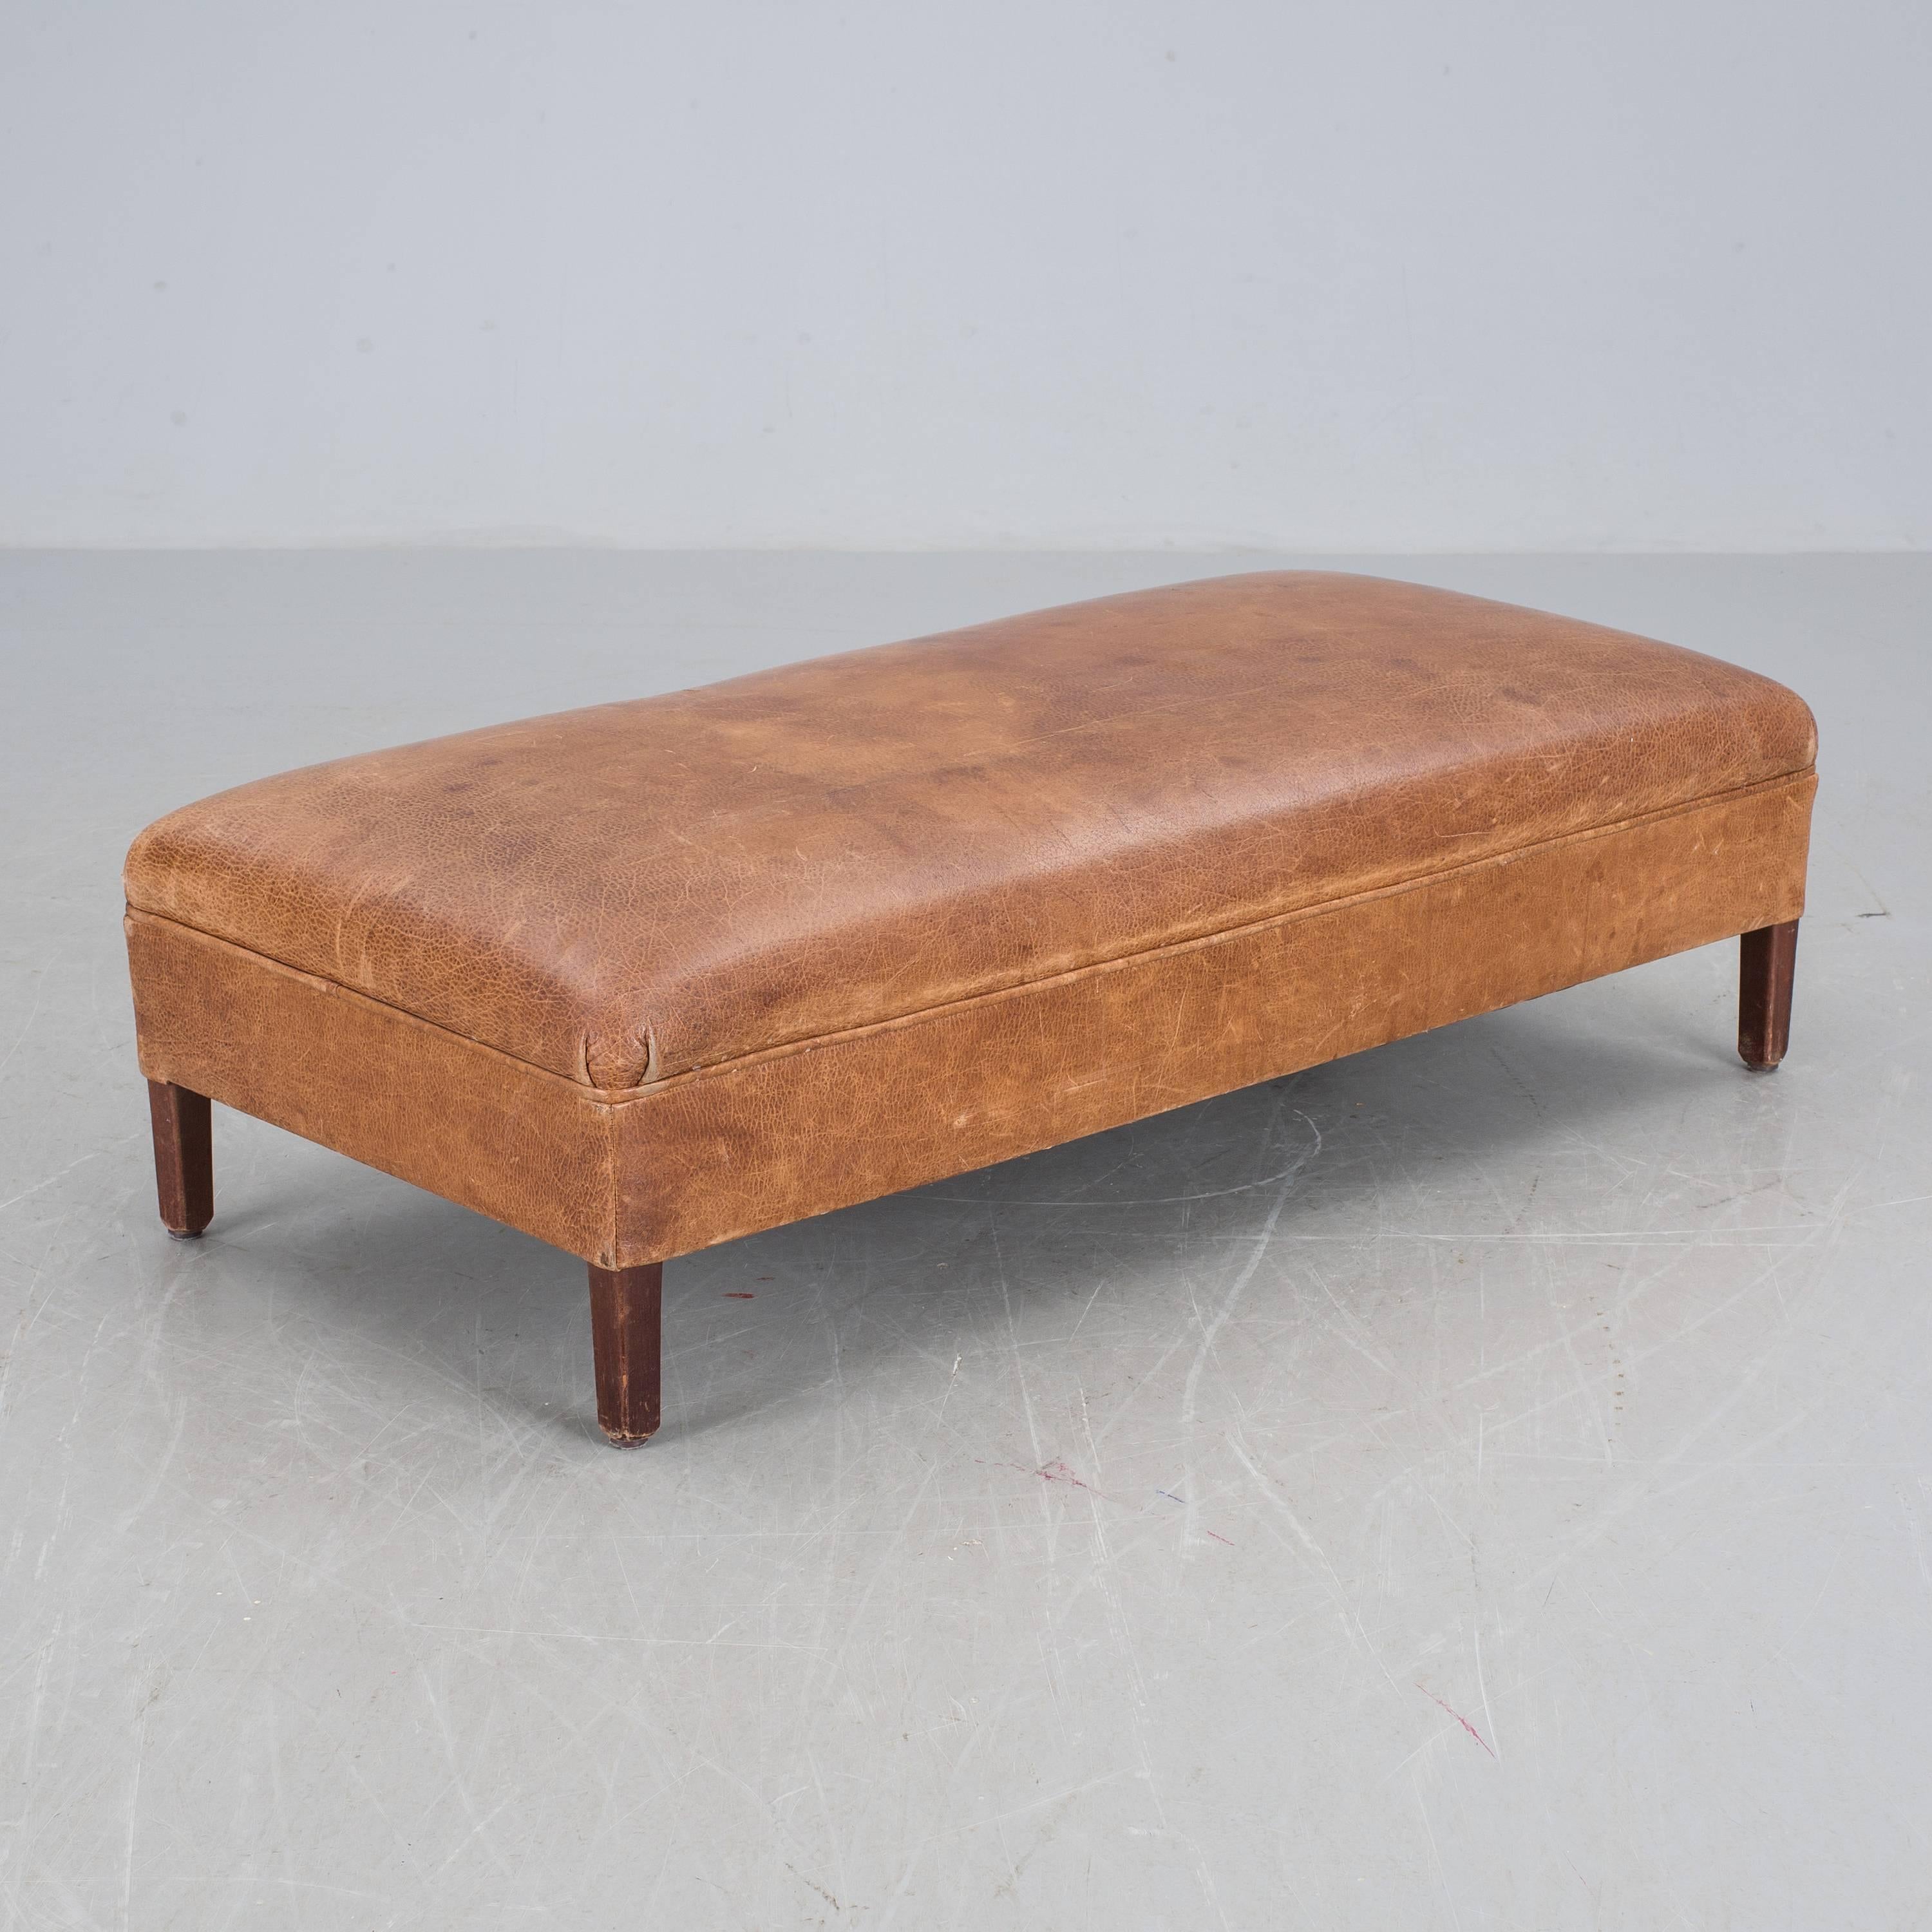 Large cognac brown leather bench or ottoman with stunning patina.